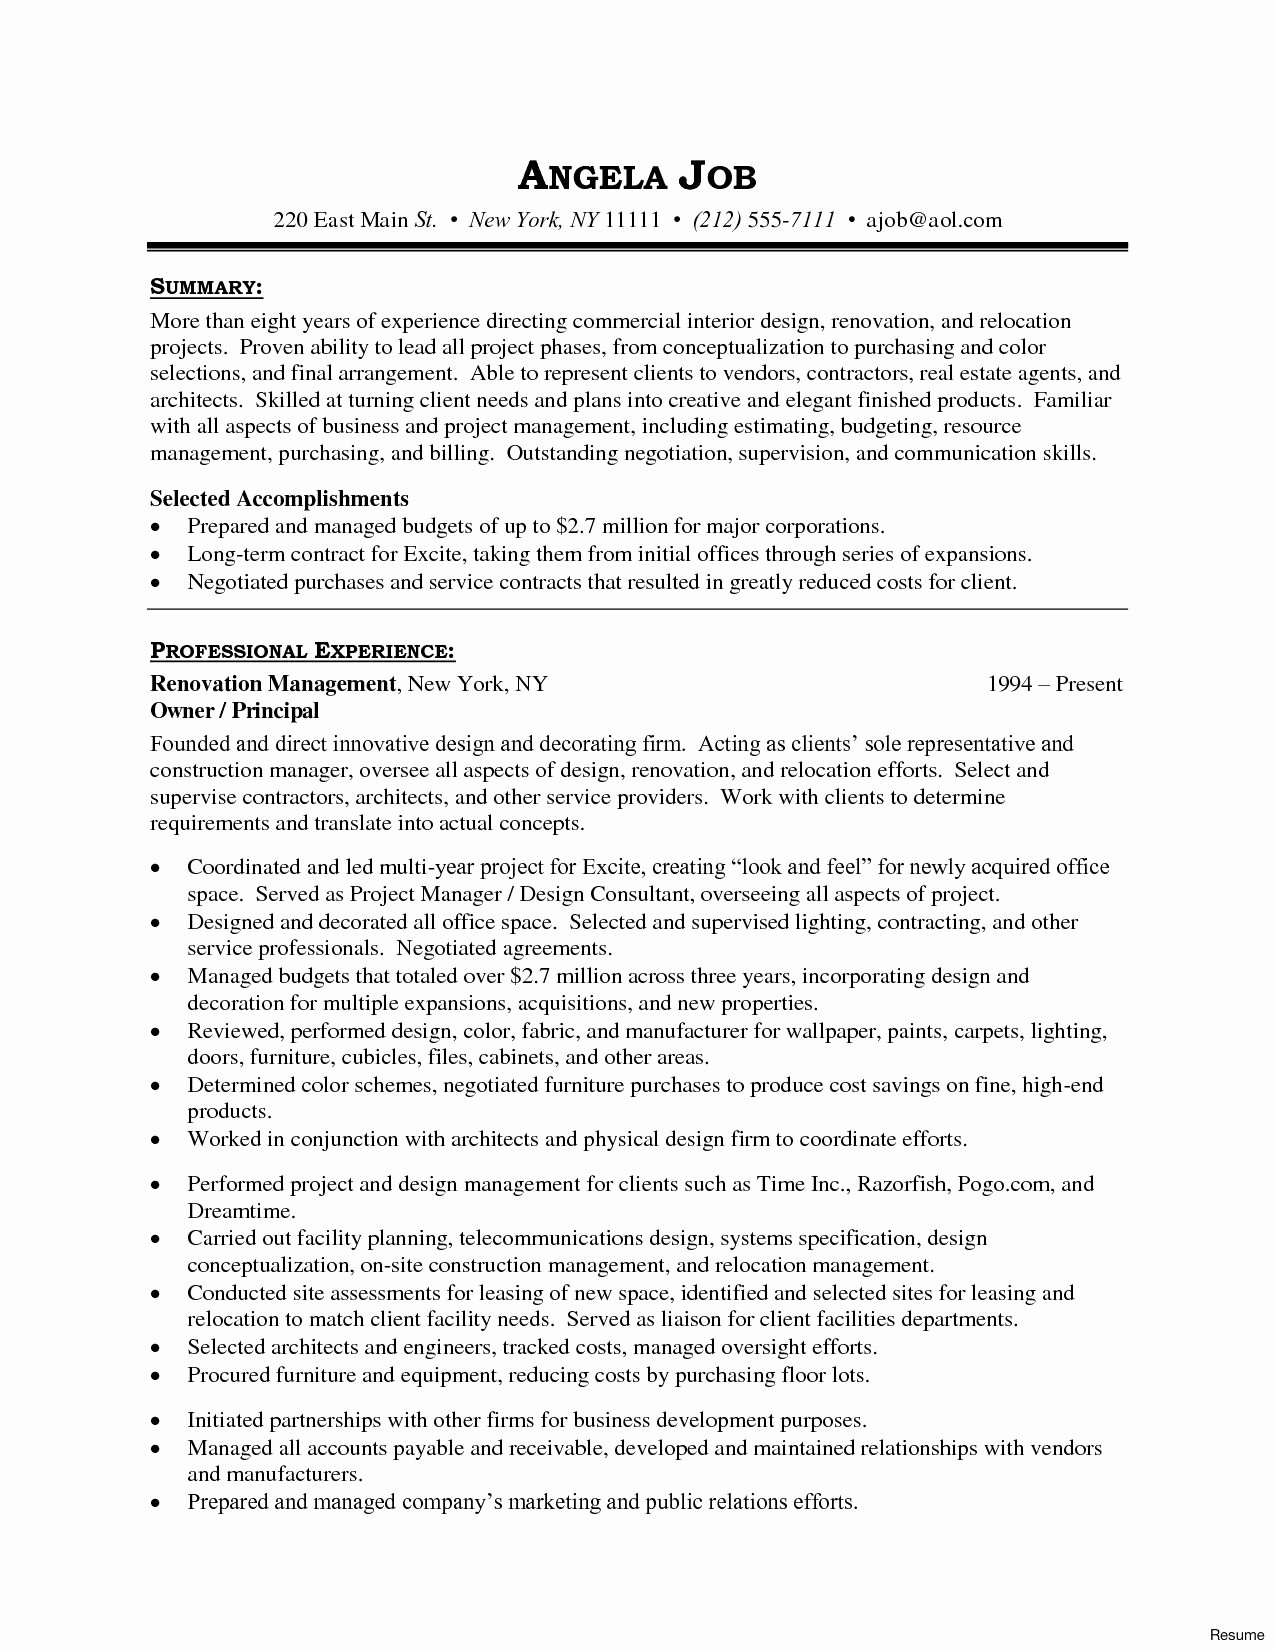 Independent Contractor Web Developer Awesome Principal Resume